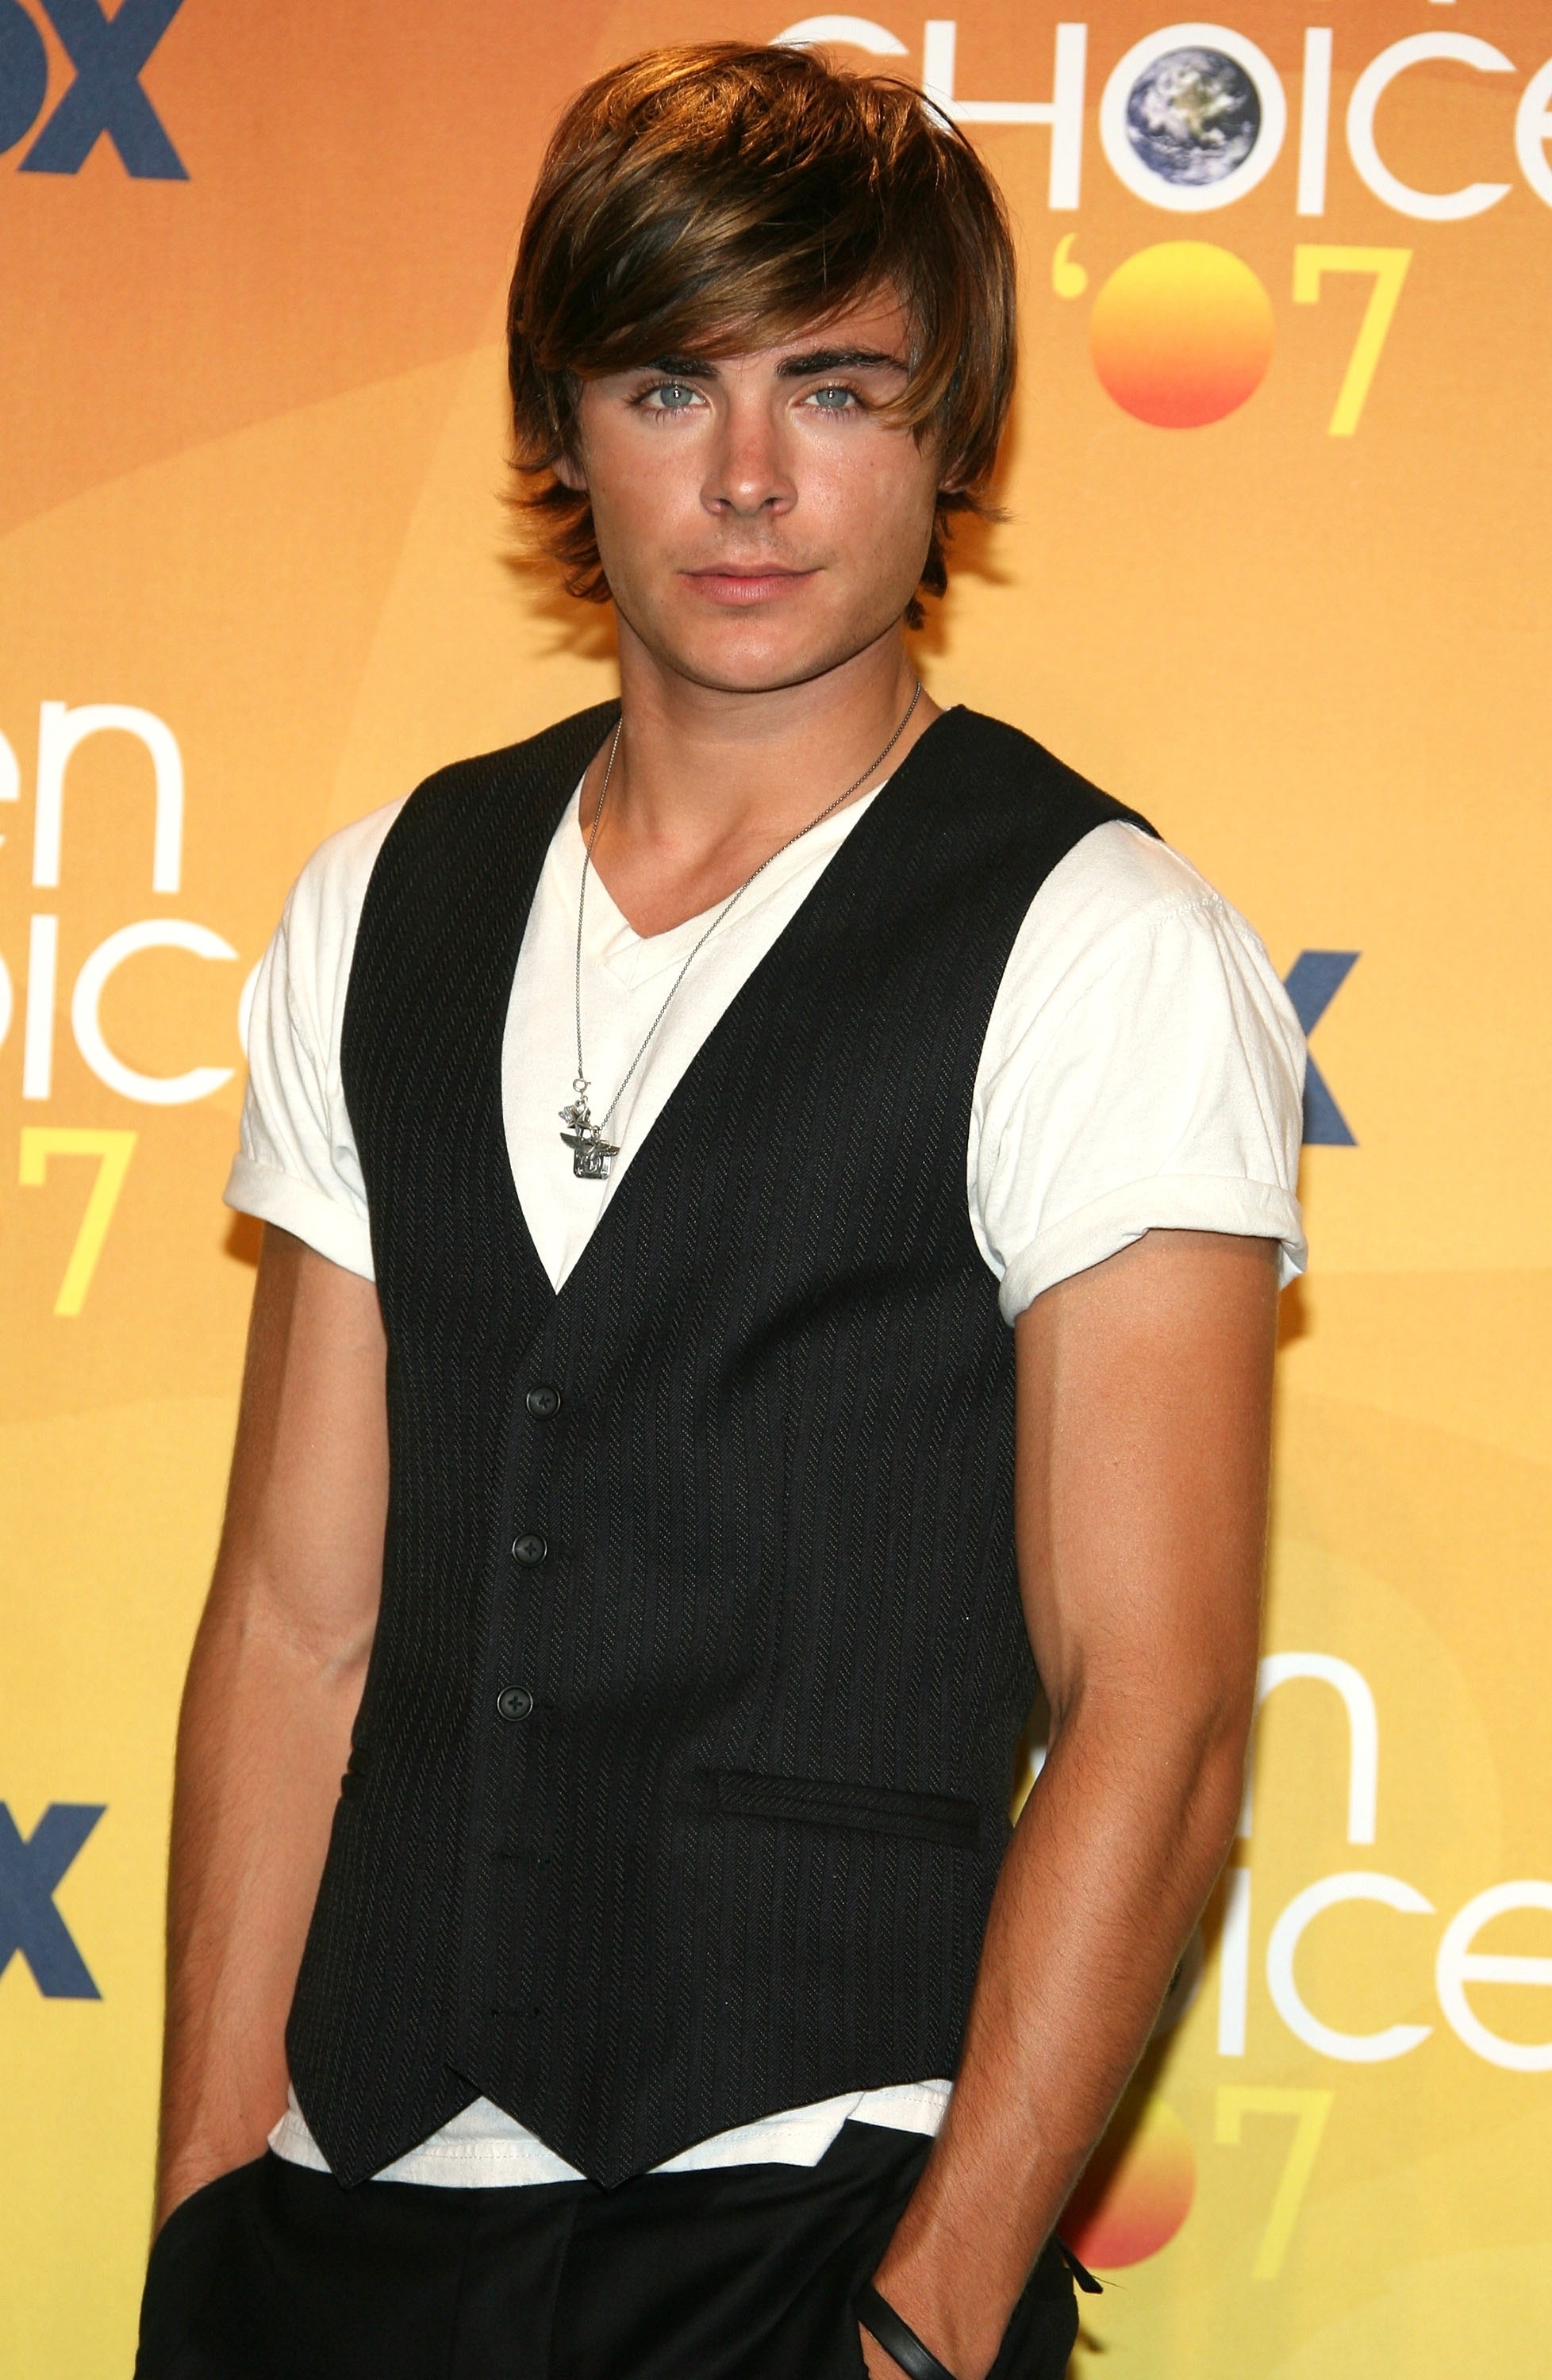 Zac Efron at the 2007 Teen Choice Awards wearing a white t-shirt under a black vest